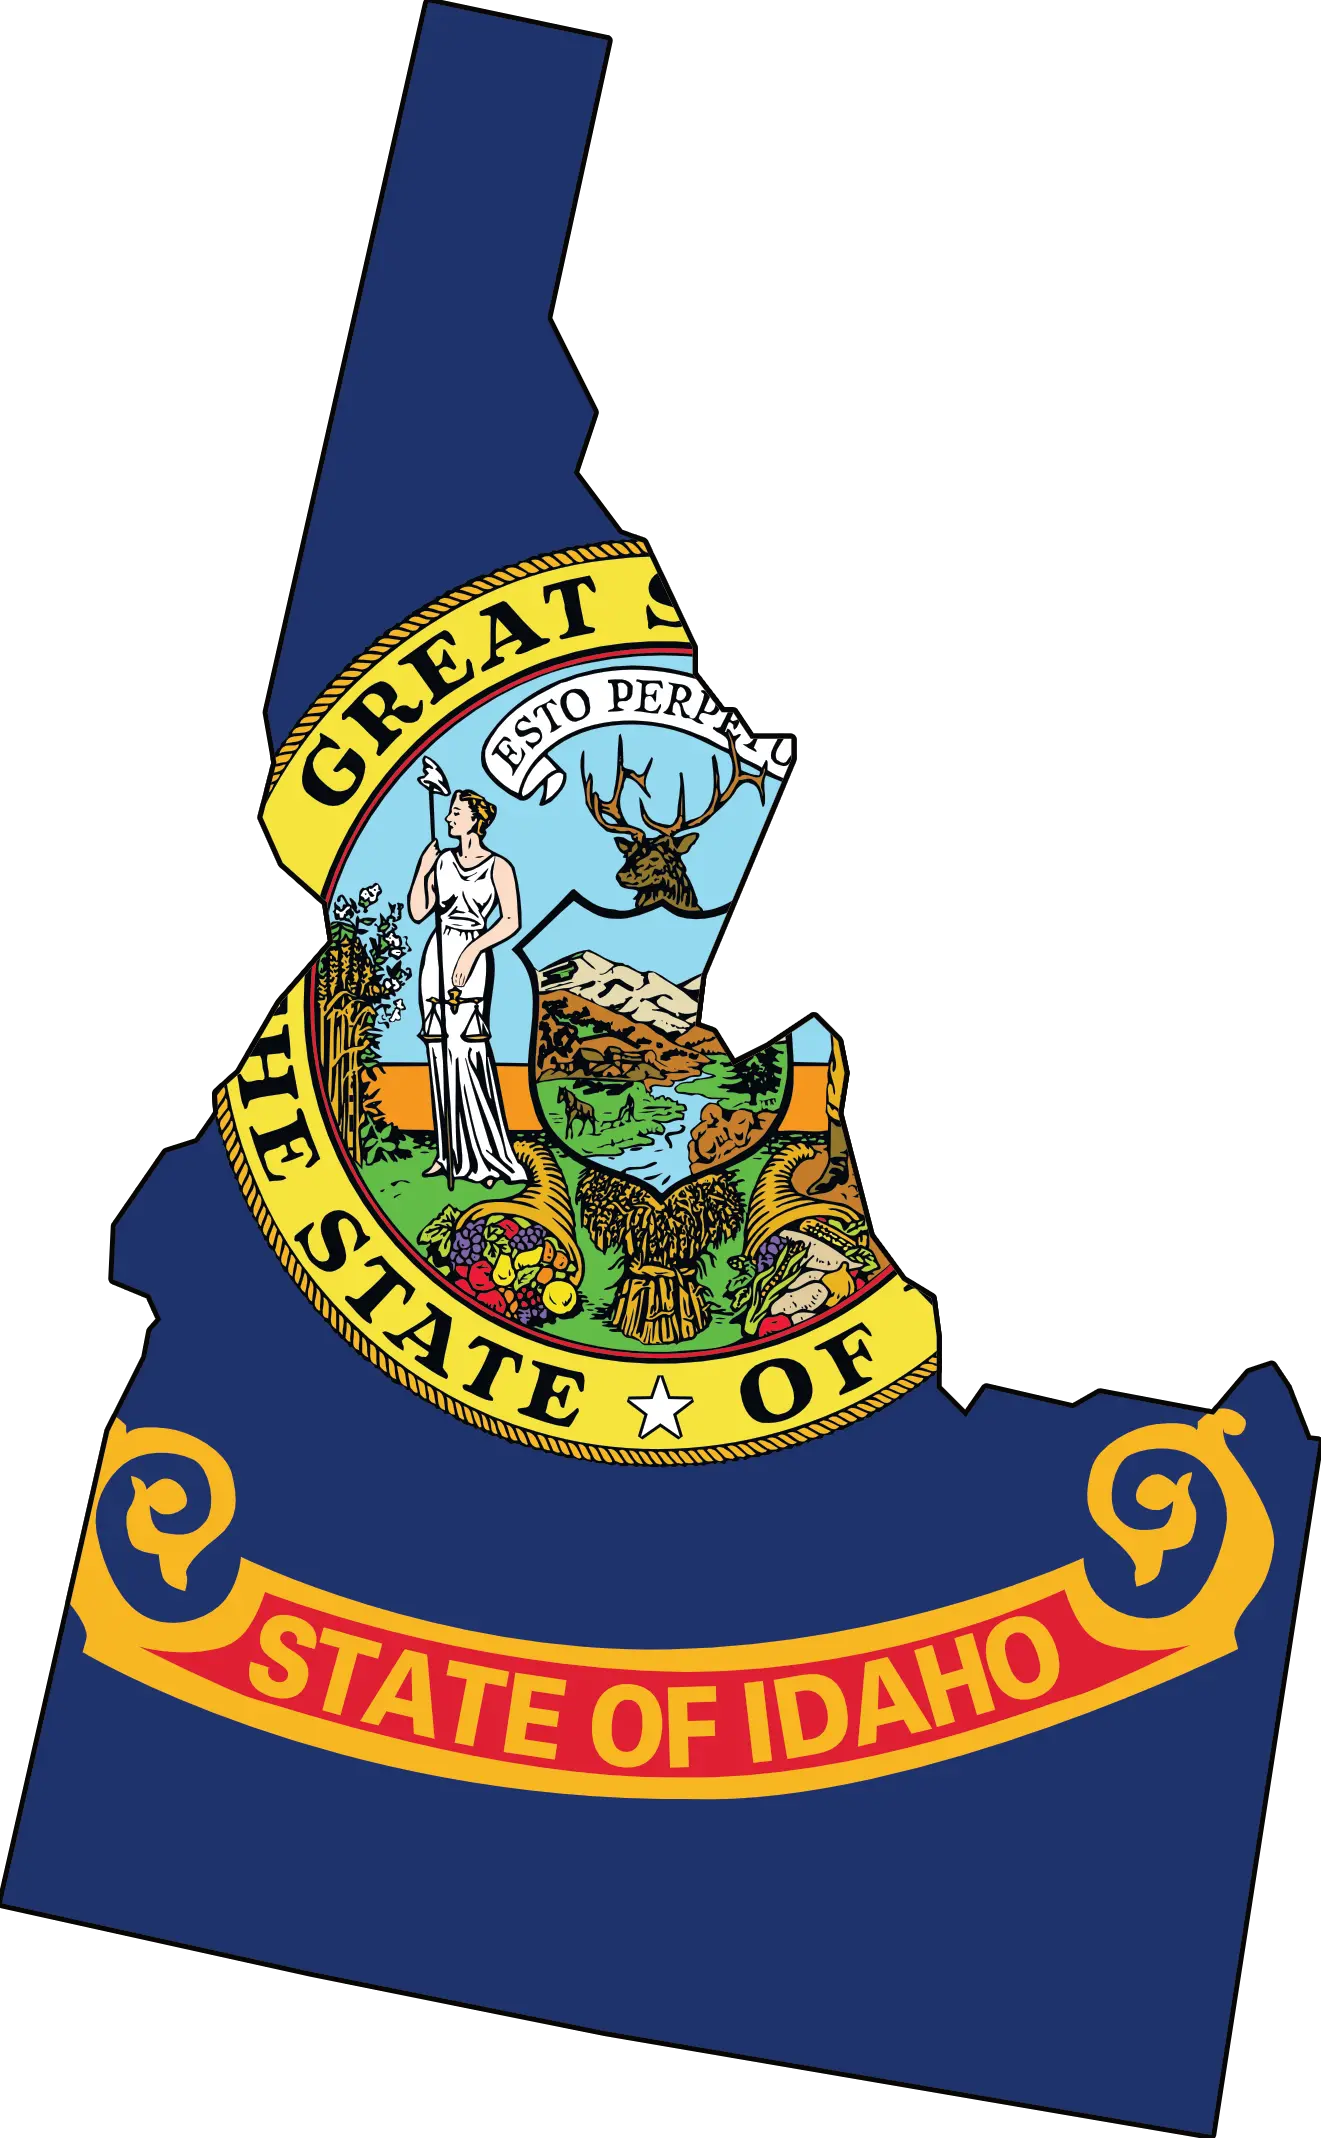 A photo of Idaho with the state flag.